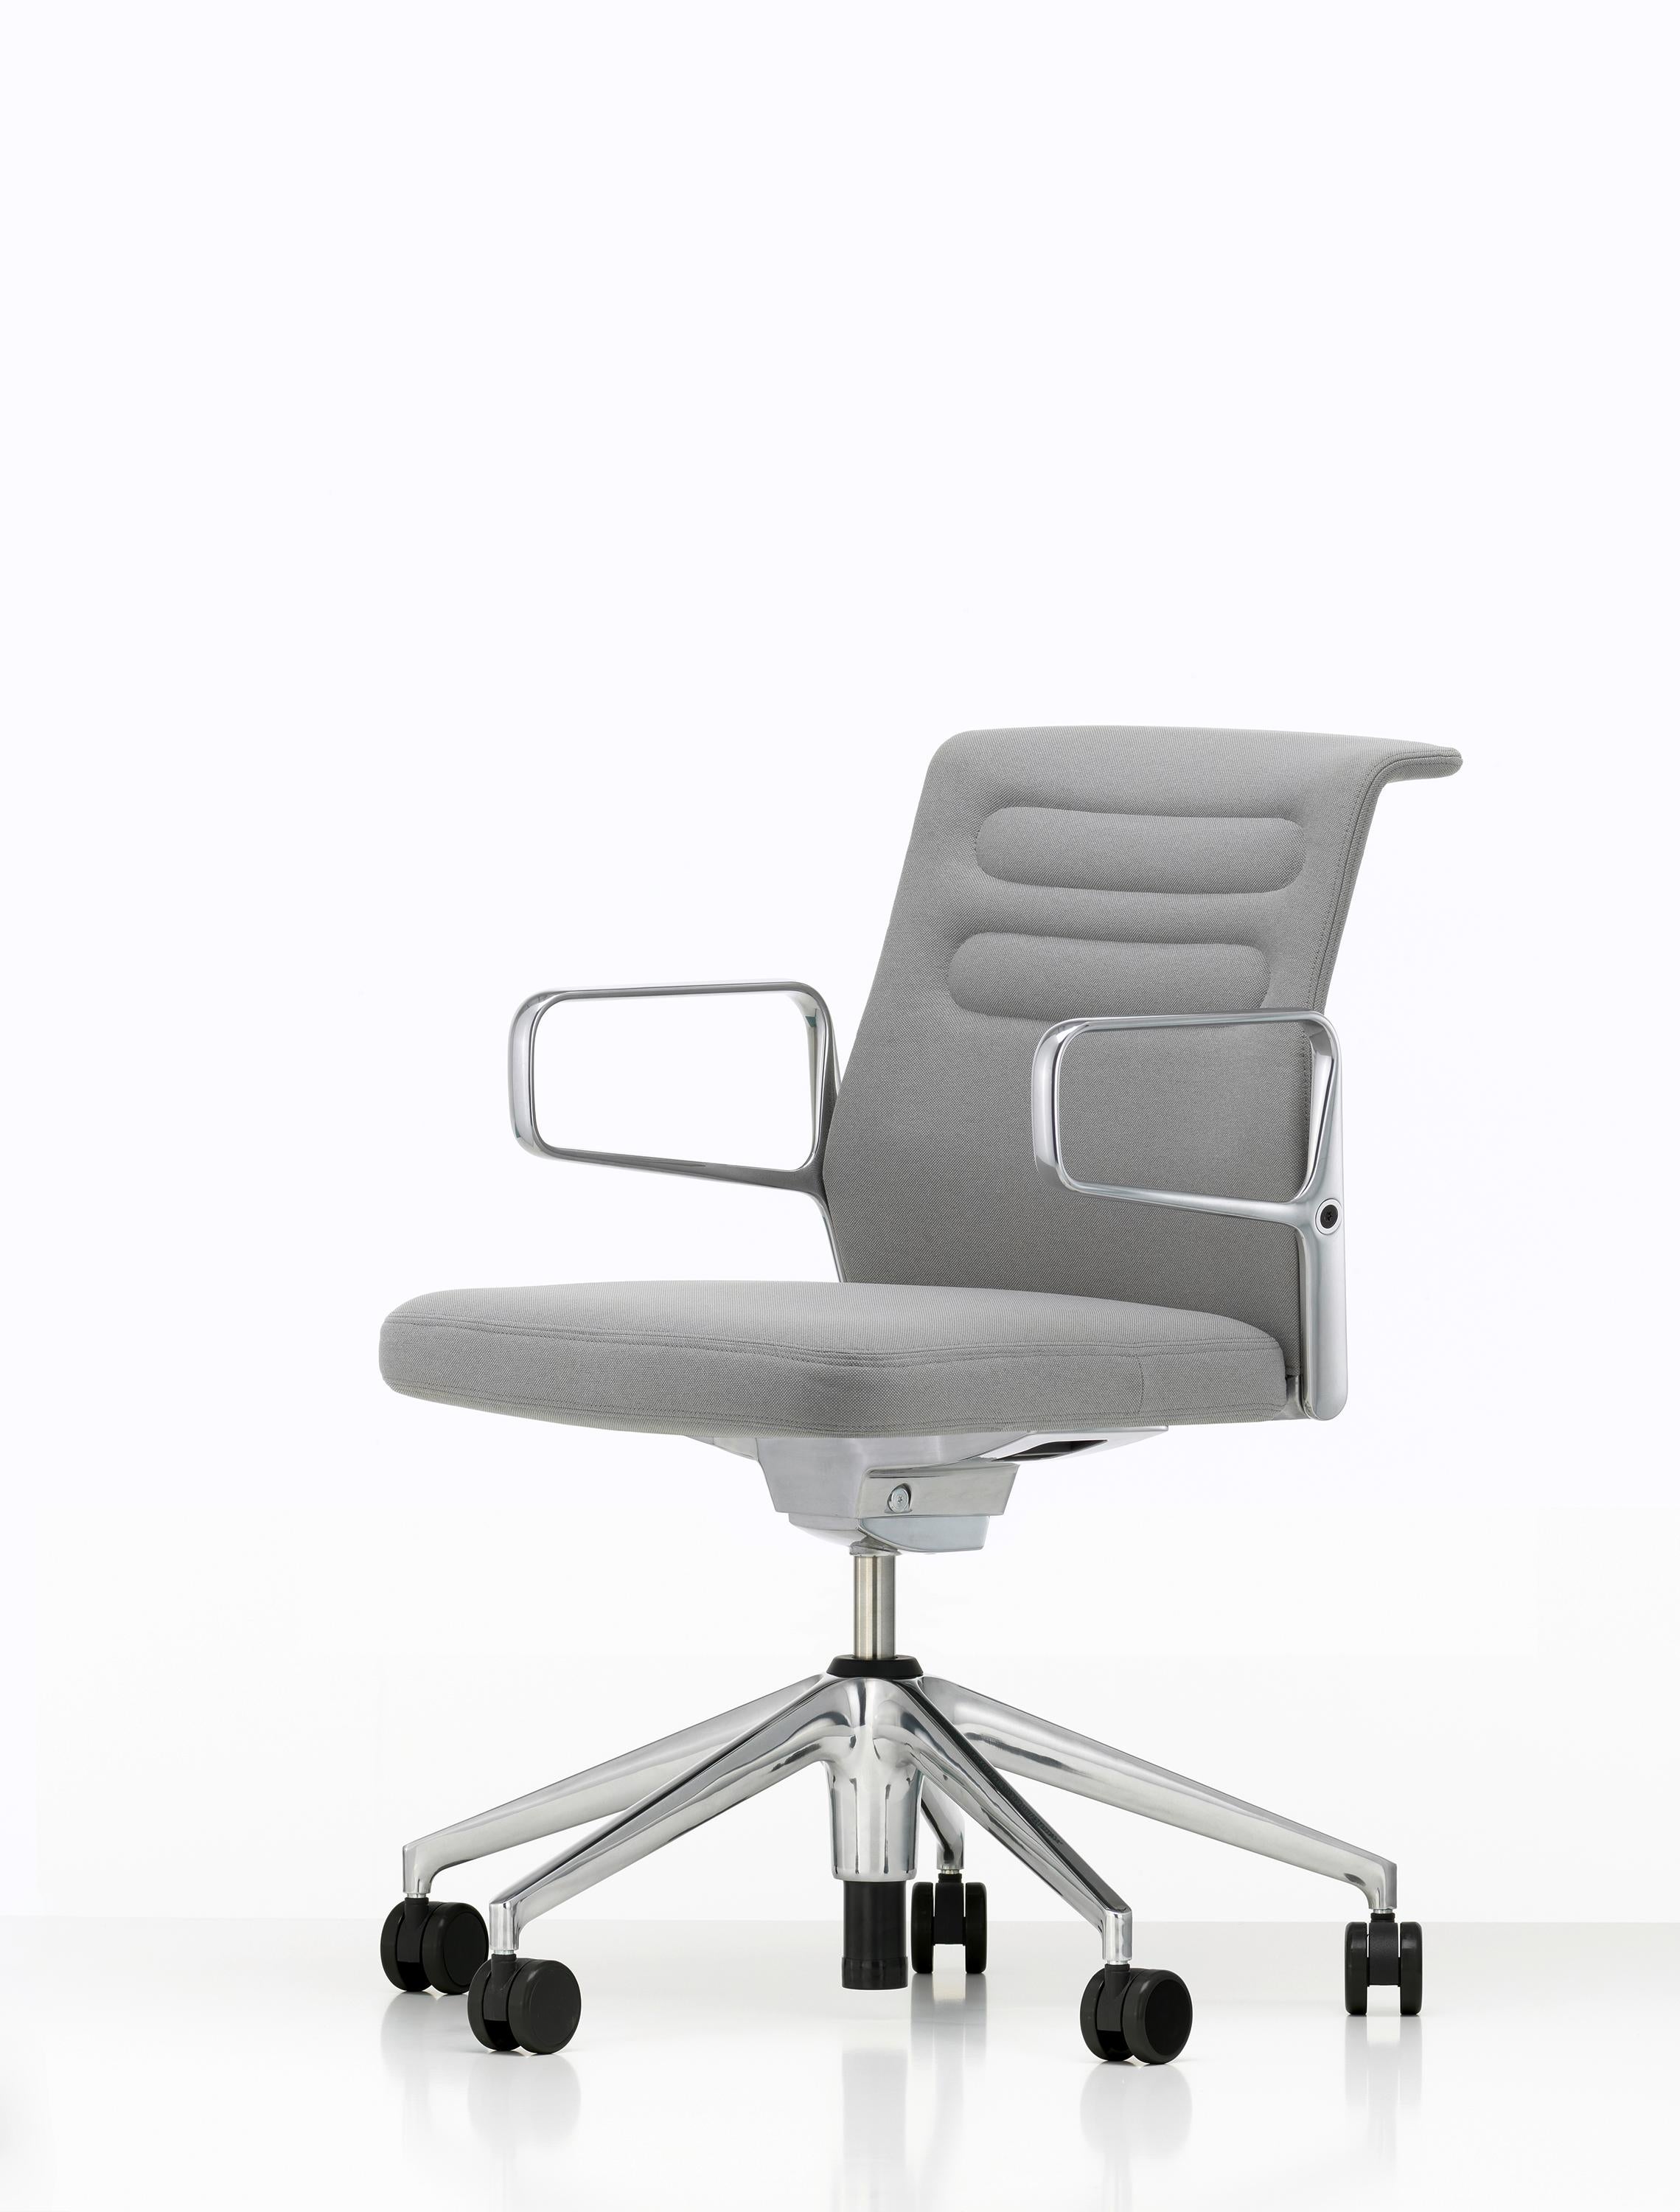 These items are currently only available in the United States.

AC 5 Studio is the reductive informal model of the AC 5 Group office chair family. Equipped with functions suited for it's use – a rocking mechanism and a height adjustment feature – AC